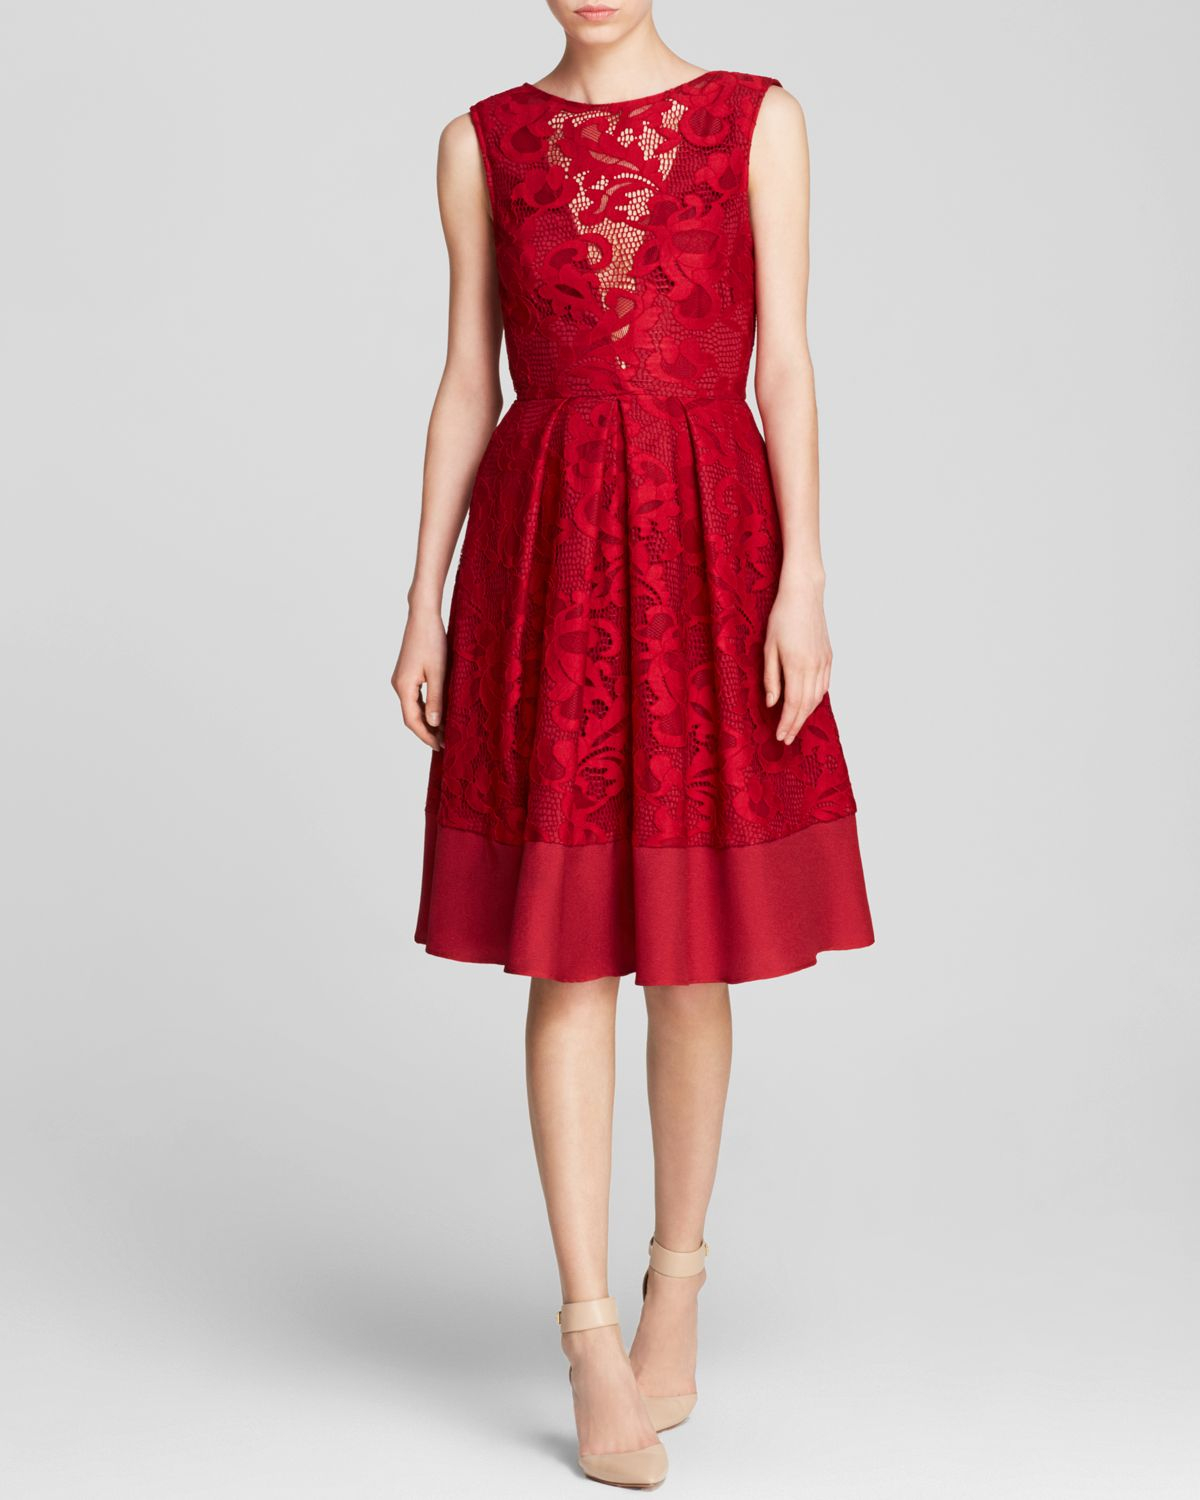 Lyst - Abs By Allen Schwartz Dress - Sleeveless Lace Fit And Flare in Red